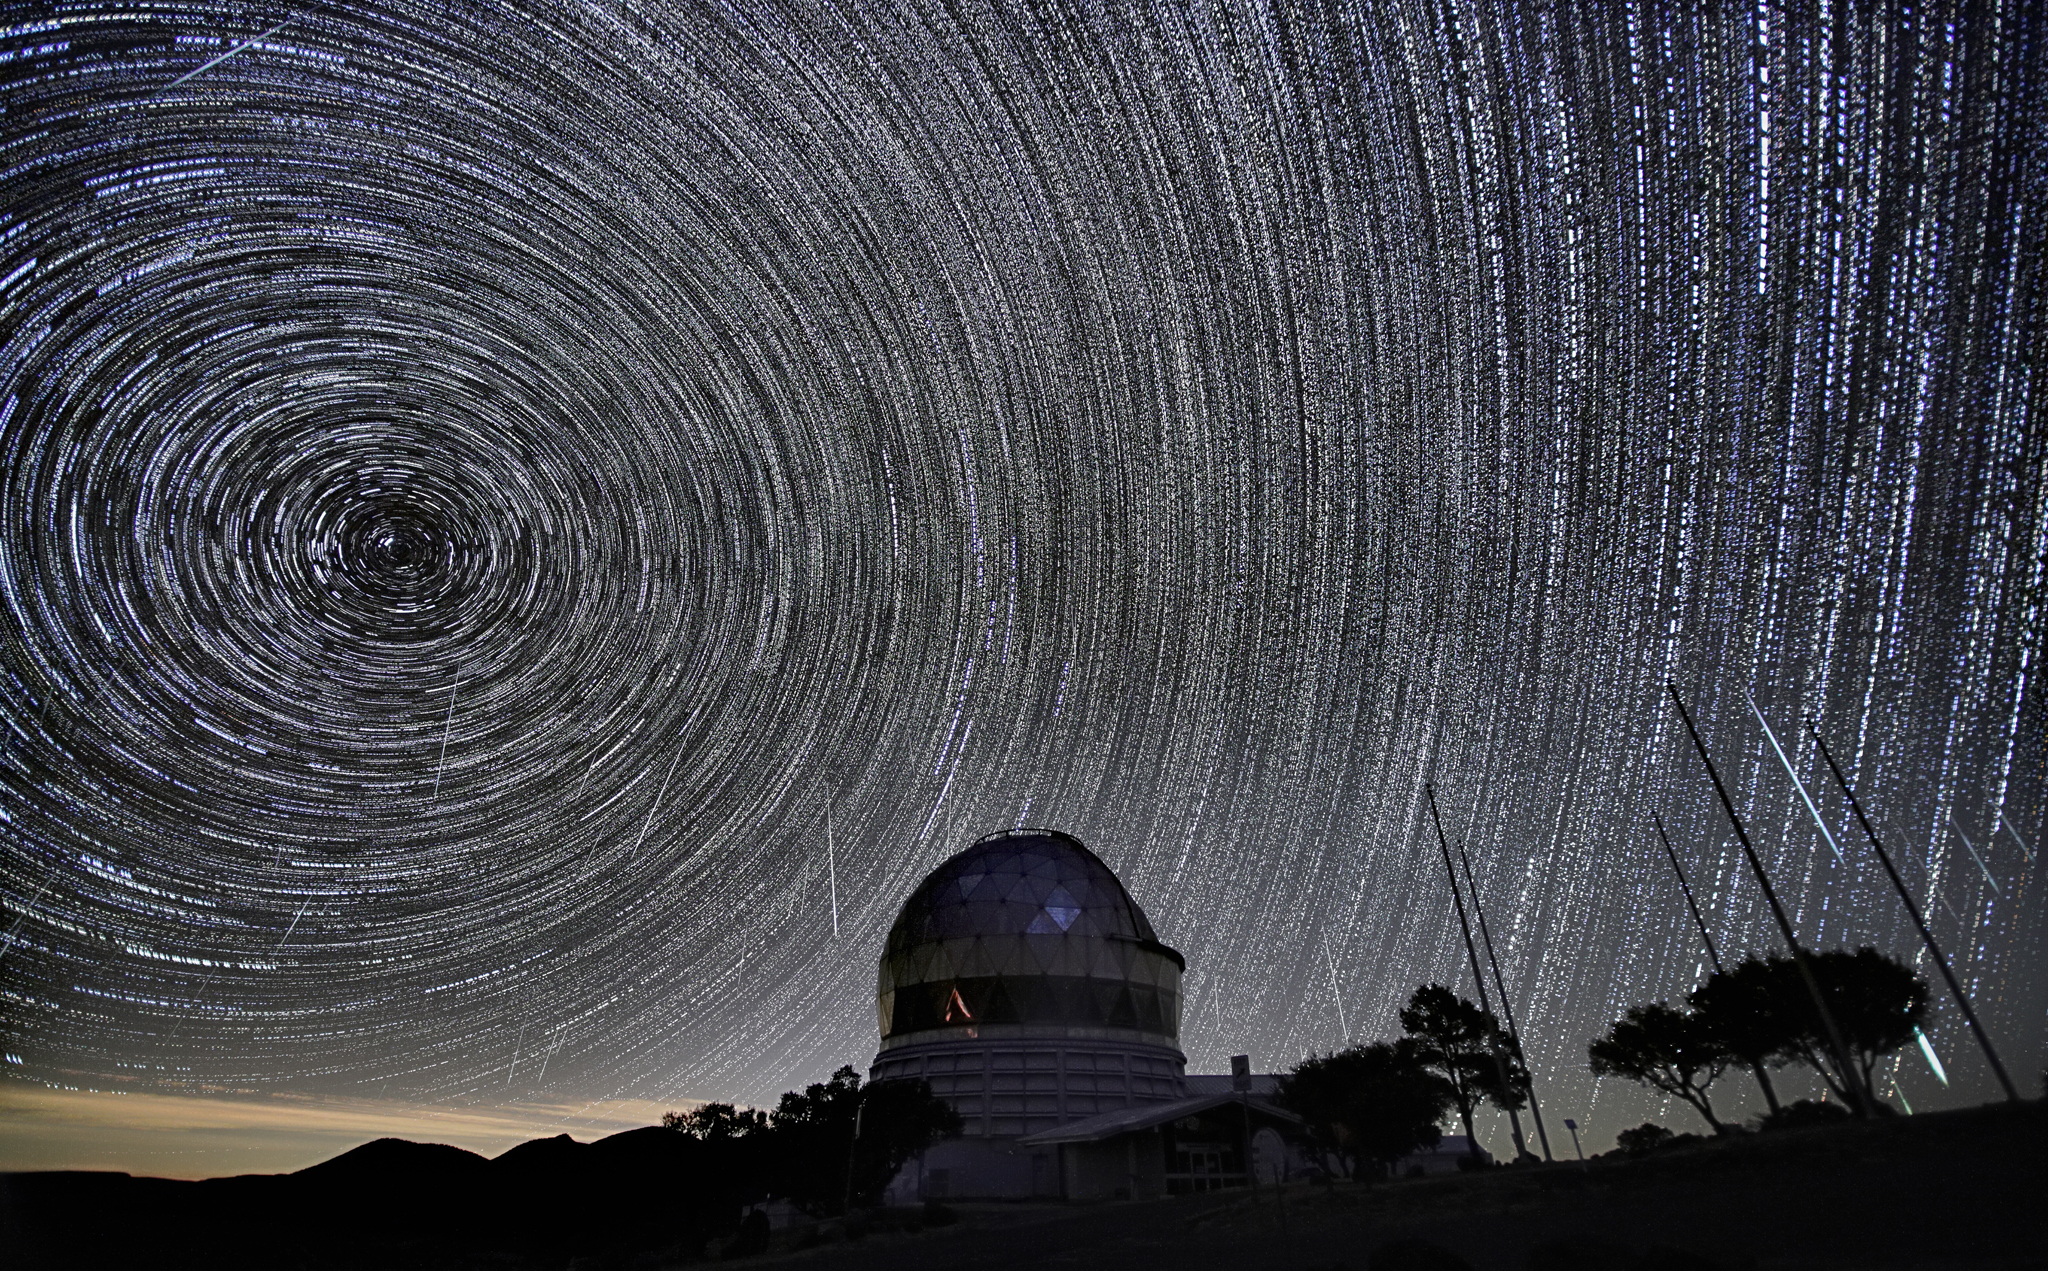 Star and Geminid meteor trails above the Hobby-Eberly Telescope